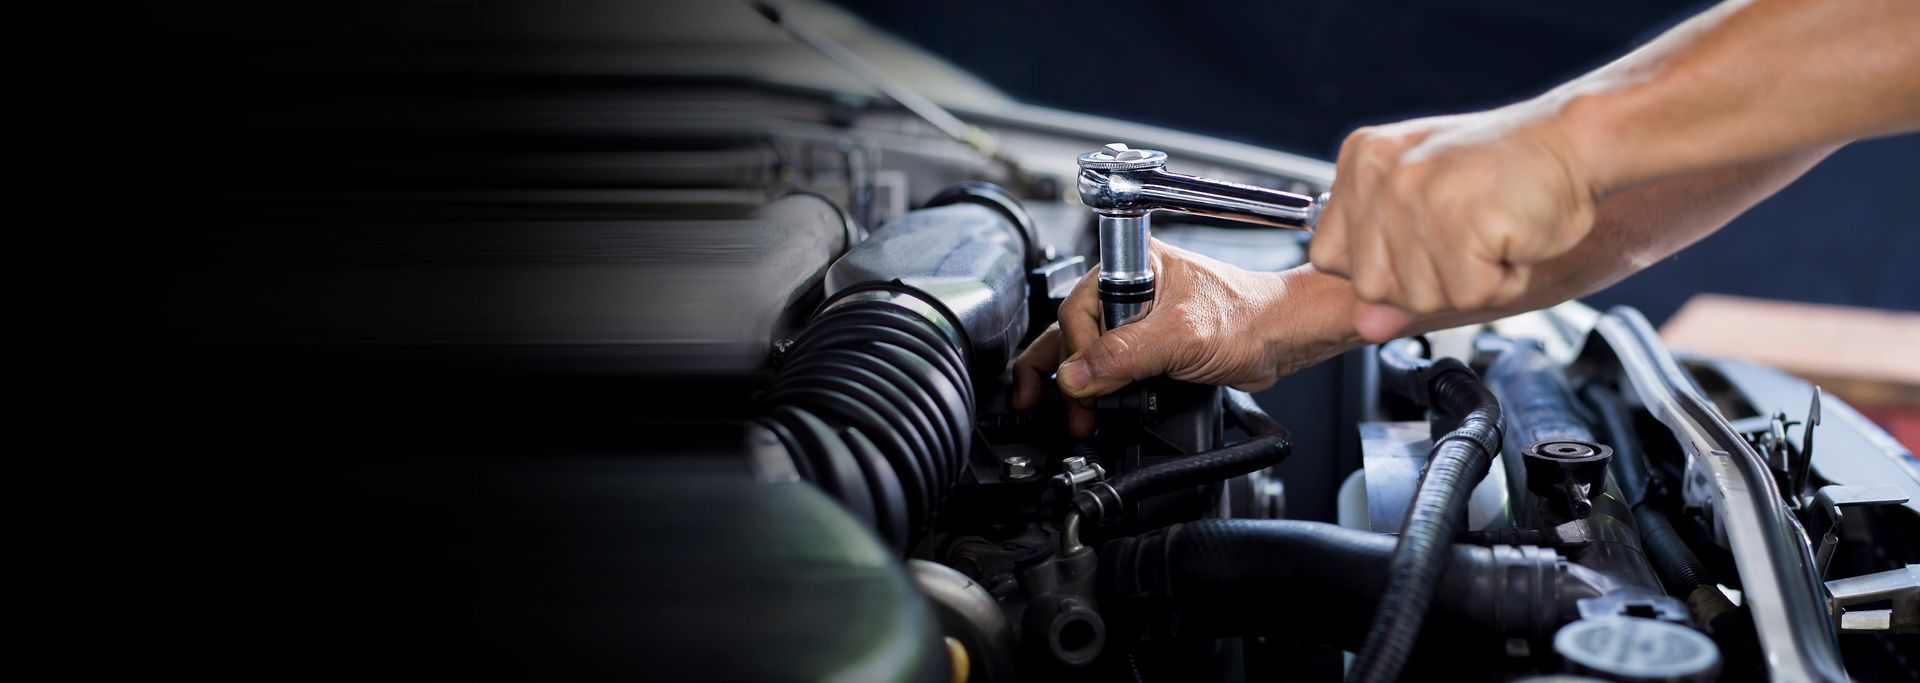 3 Systems & Components You Must Check Before a Long Drive | Laguna Auto Service Center
